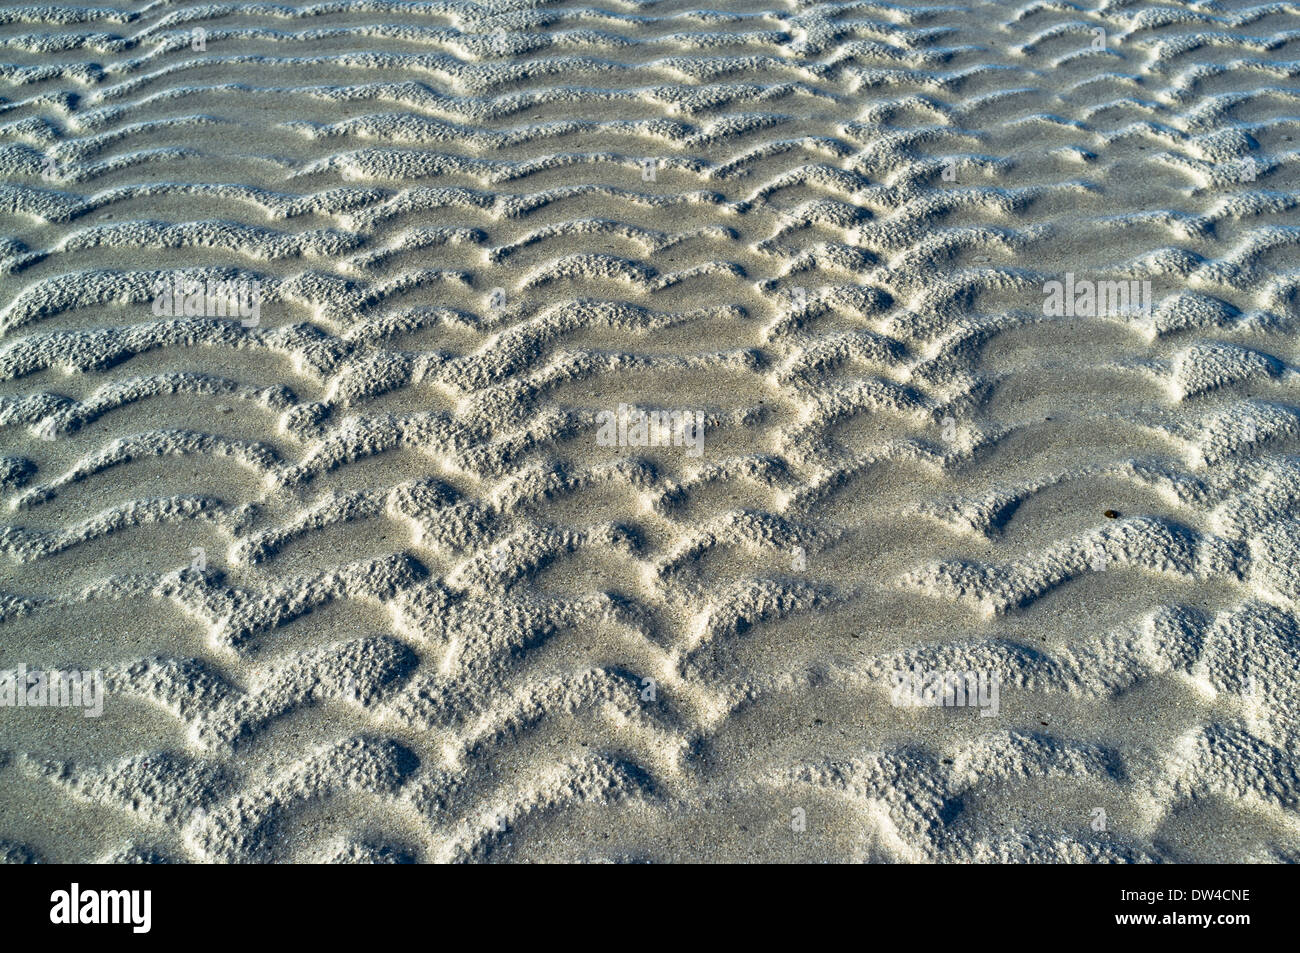 dh  SAND BACKGROUND Abstract sand patterns low tide seabed background pattern close up beach texture Stock Photo